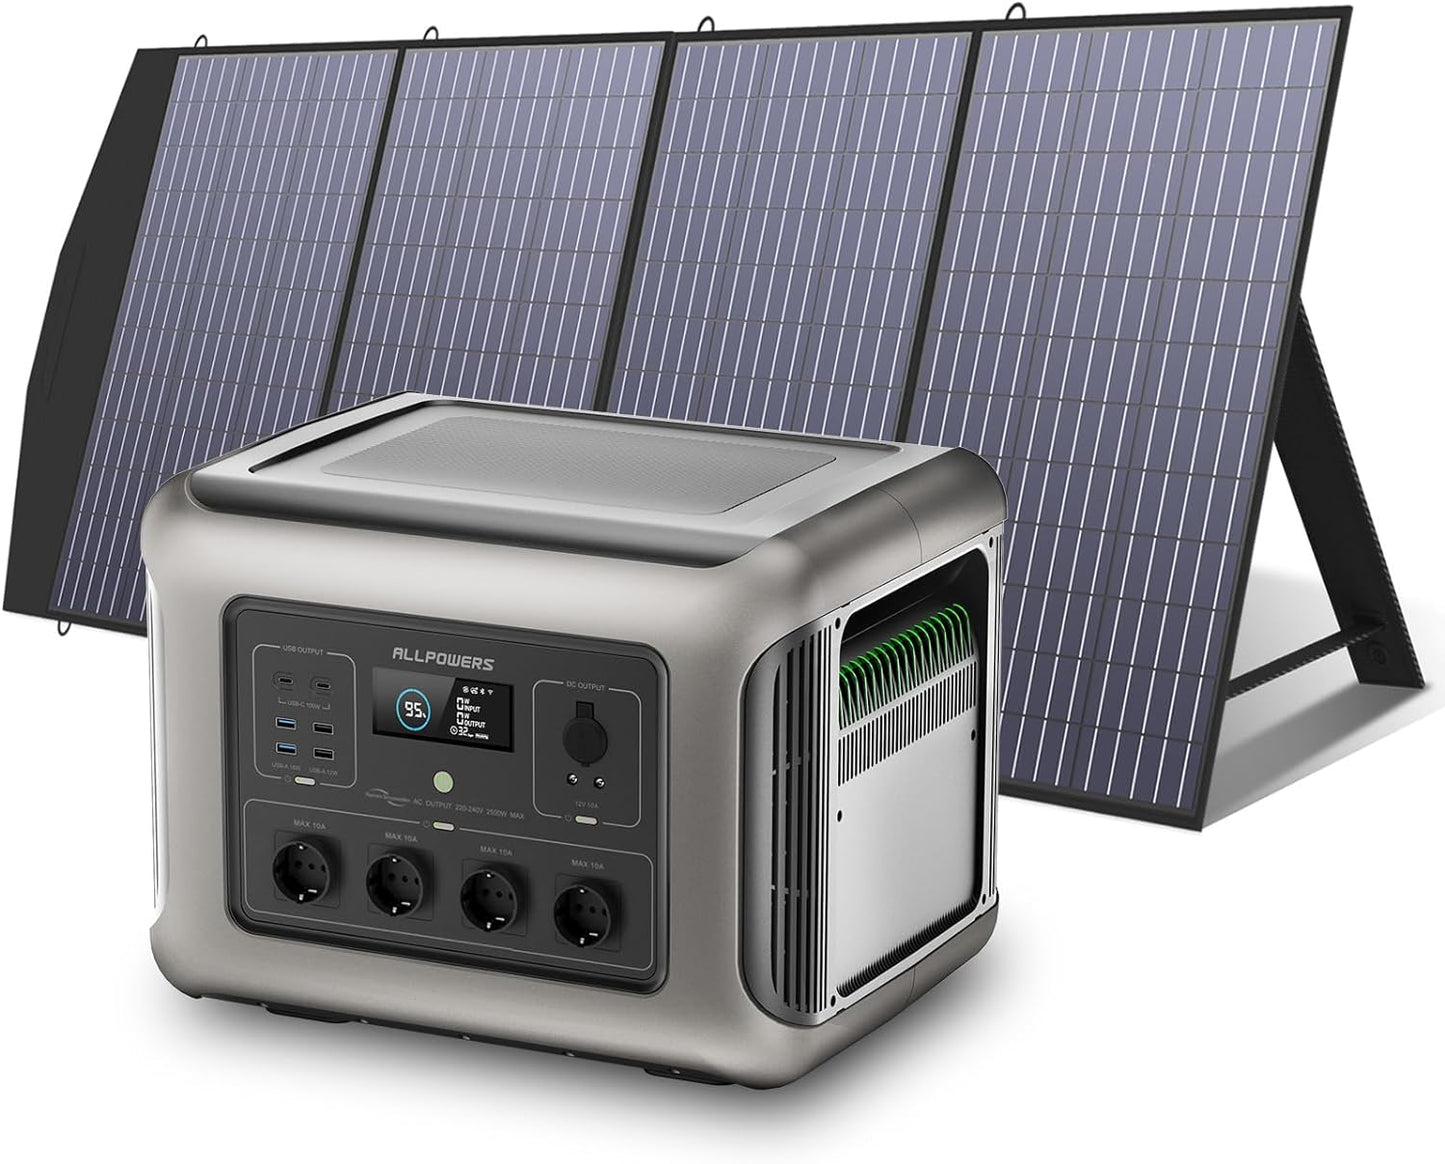 ALLPOWERS R2500 Portable Power Station, 2016Wh LiFePO4 Battery with 3500+ Cycles, 1000W Solar Charging 2500W AC Output Solar Generator, Mobile Emergency Power Supply for Garden Travel Camping Motorhome